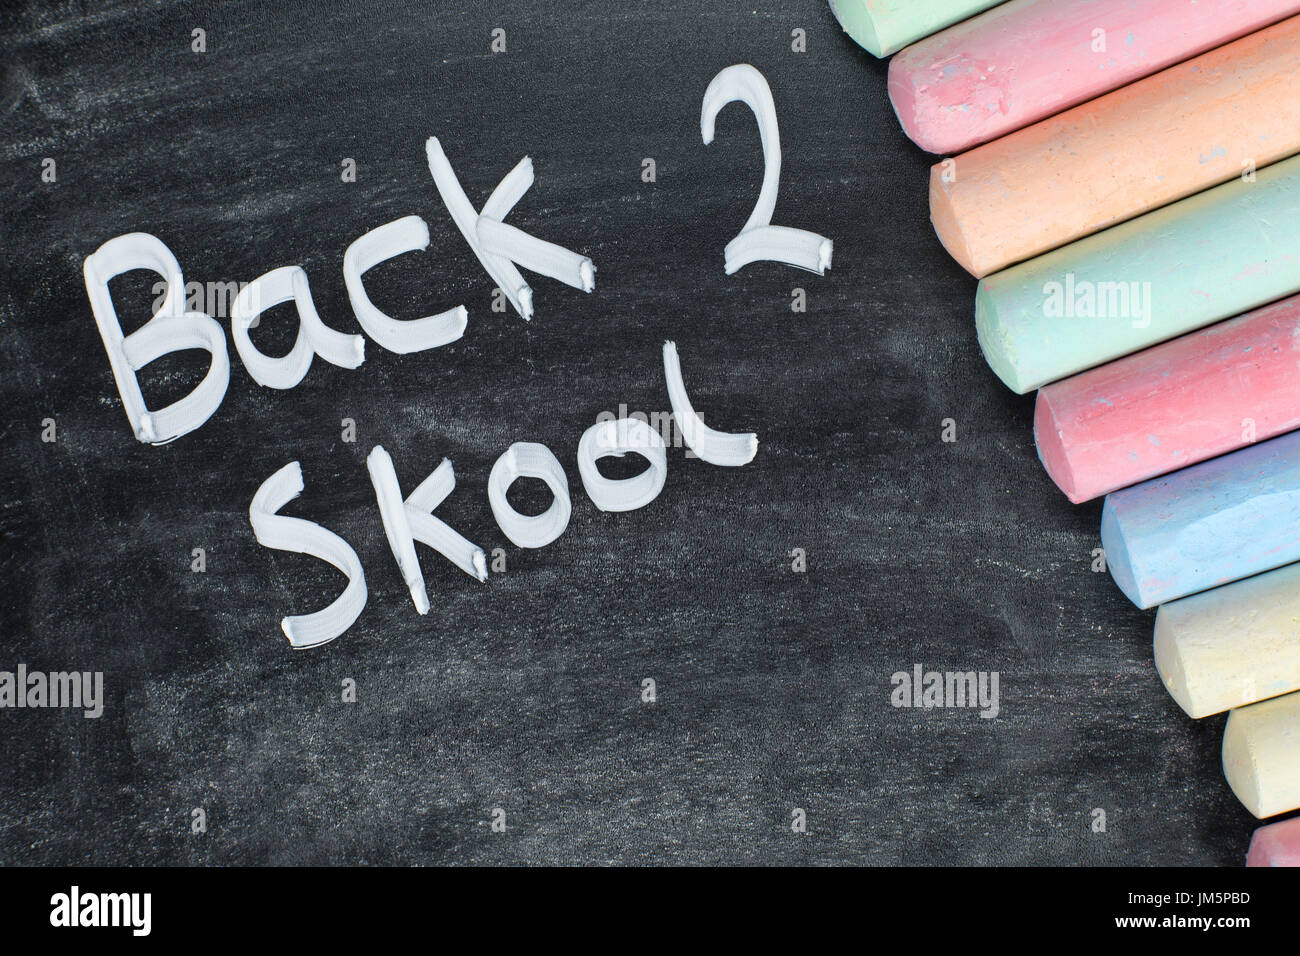 Misspelt Back 2 Skool concept with handwritten text on a textured chalkboard with a colorful border of chalk sticks and copy space Stock Photo